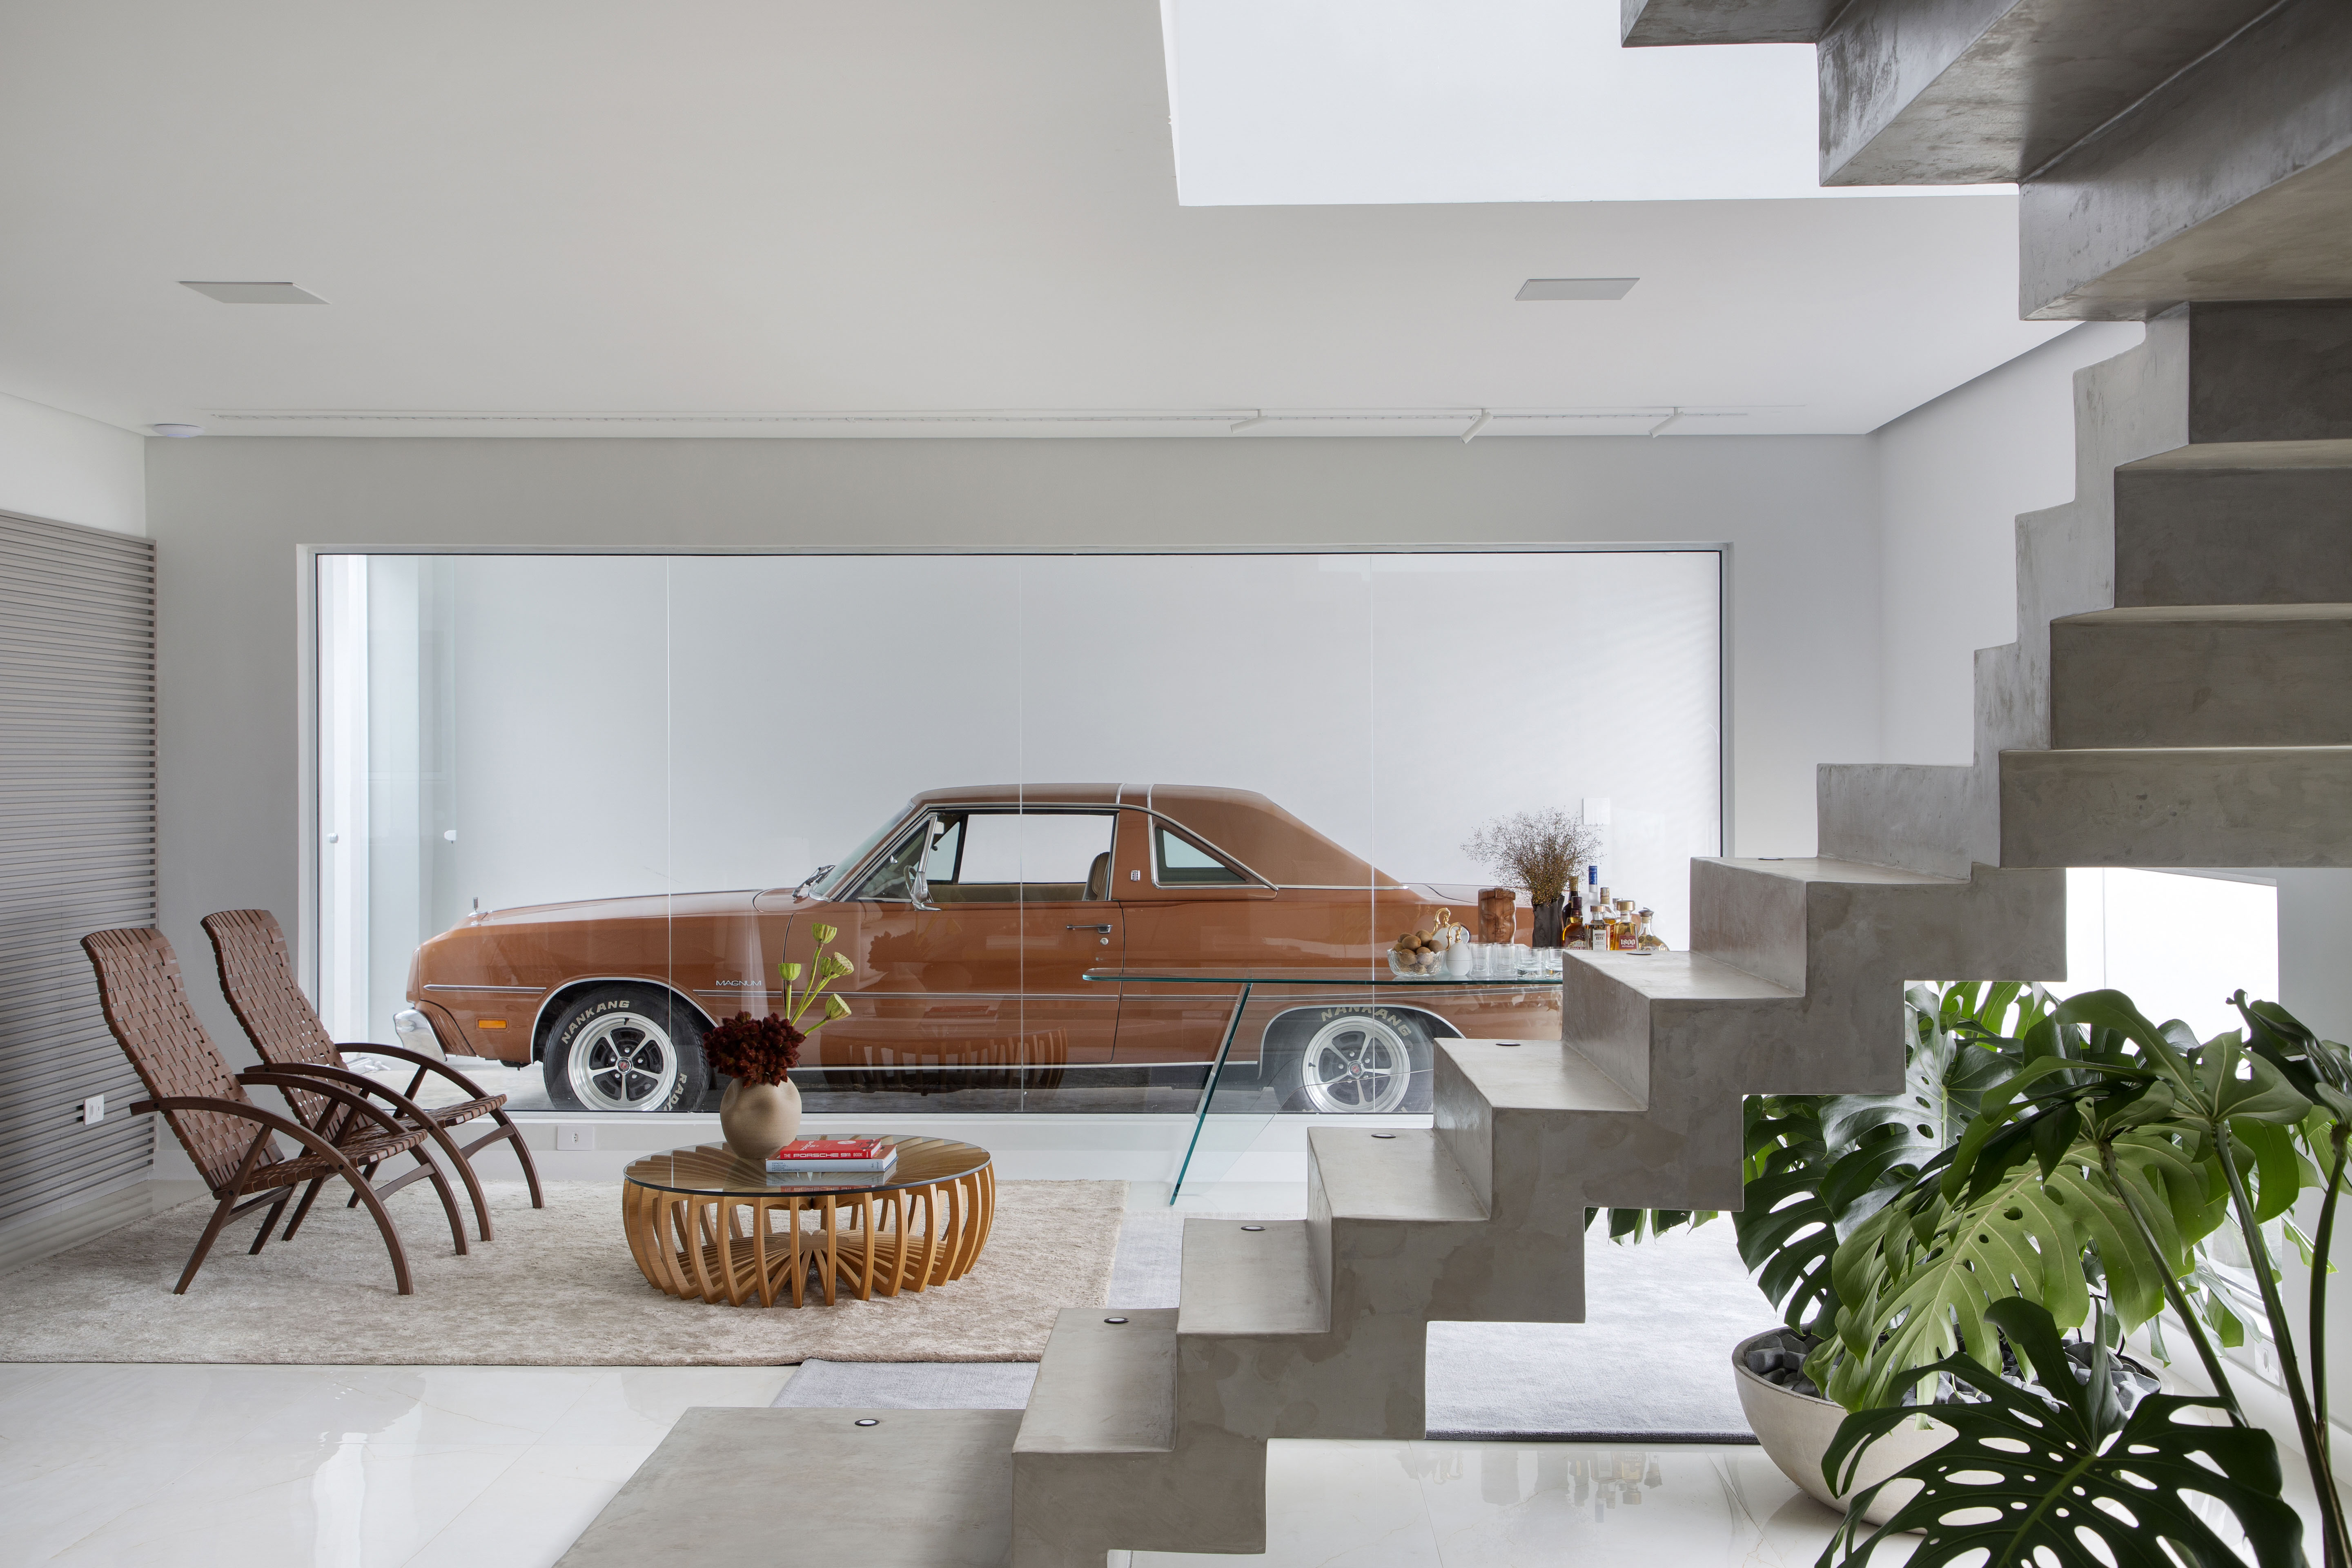 Passion for motorsport guides the design of this beach house